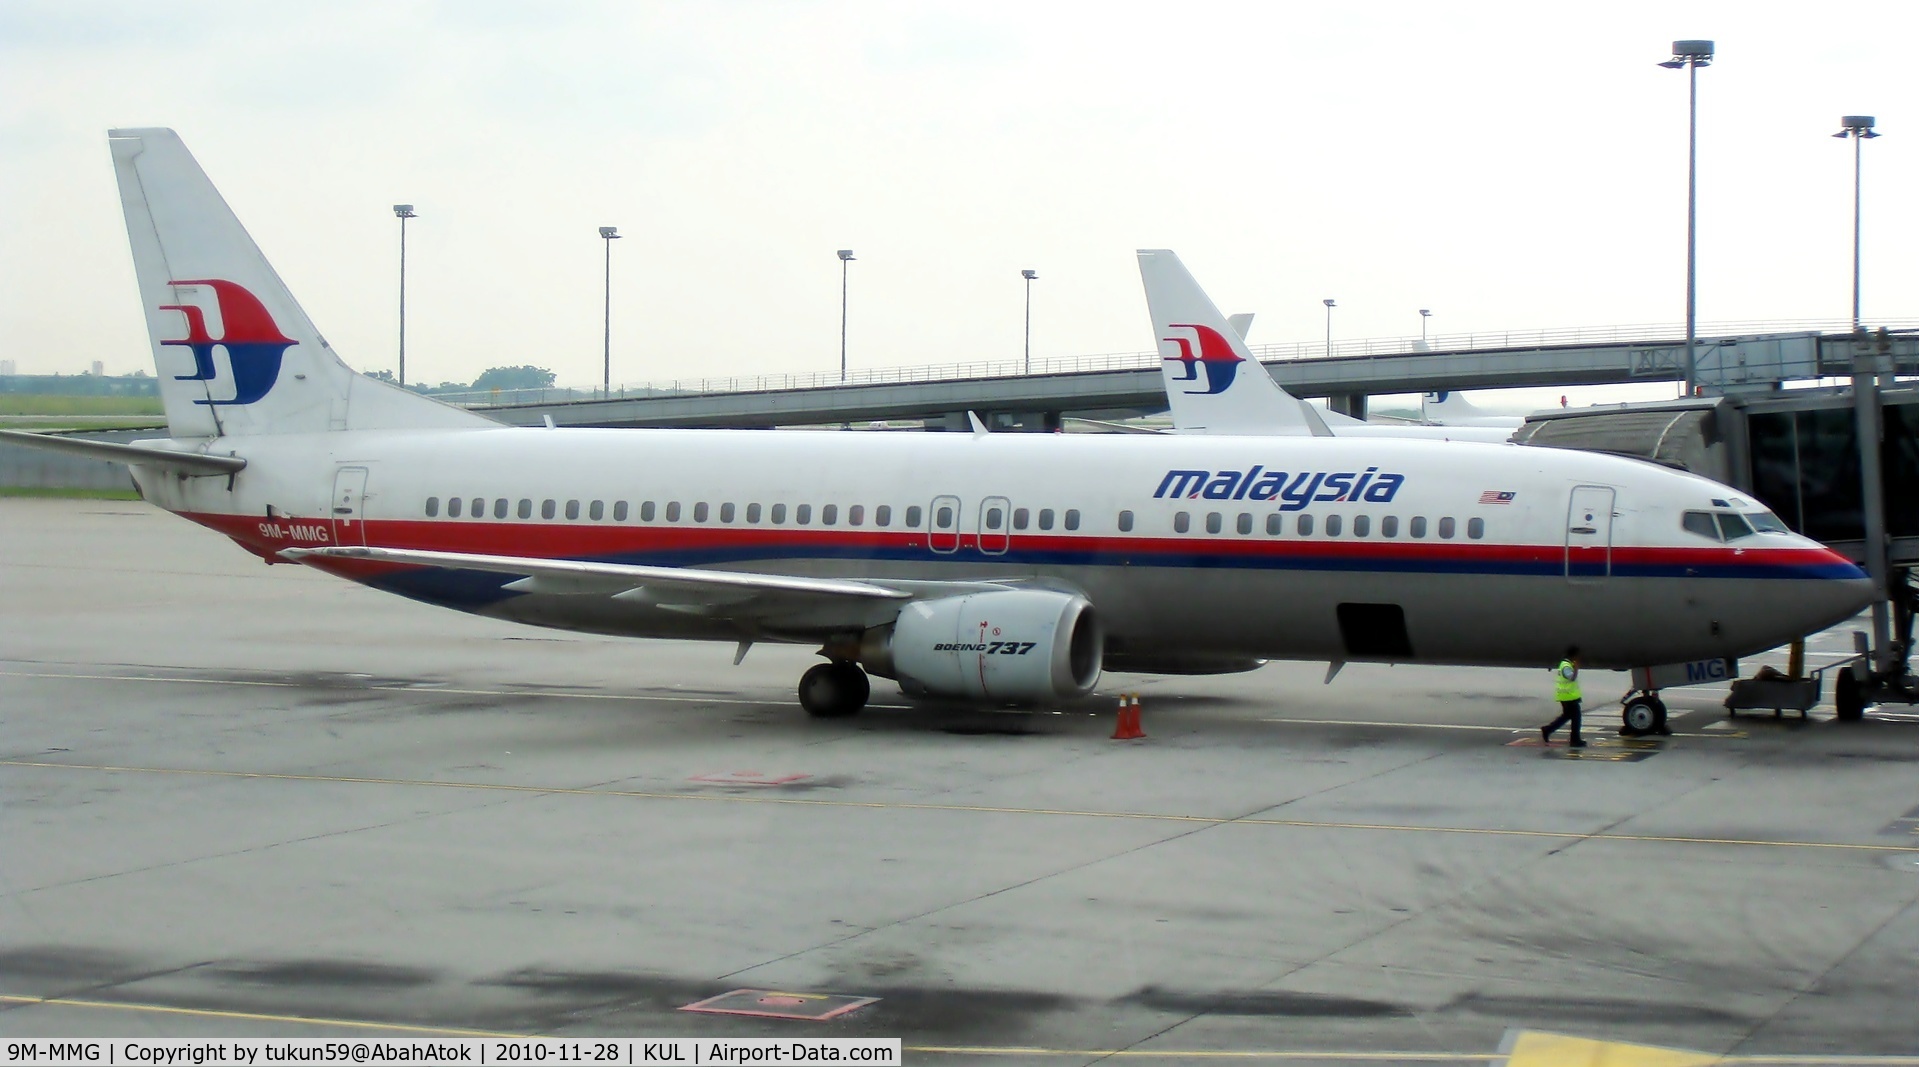 9M-MMG, 1992 Boeing 737-4H6 C/N 26467, Malaysia Airlines